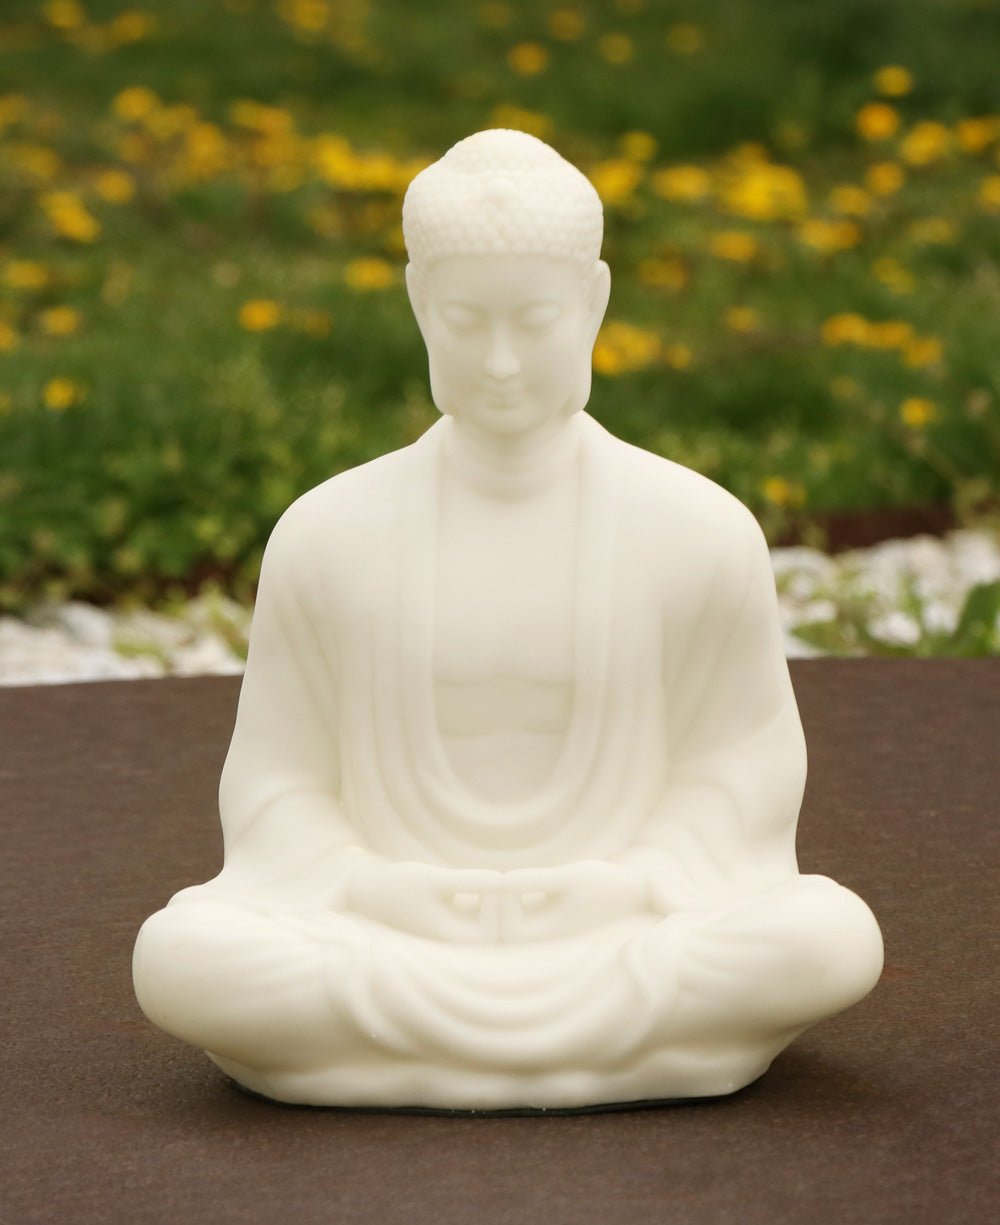 Sitting Garden Buddha Statue in Pearl White, 21 Inches Tall - Sculptures & Statues